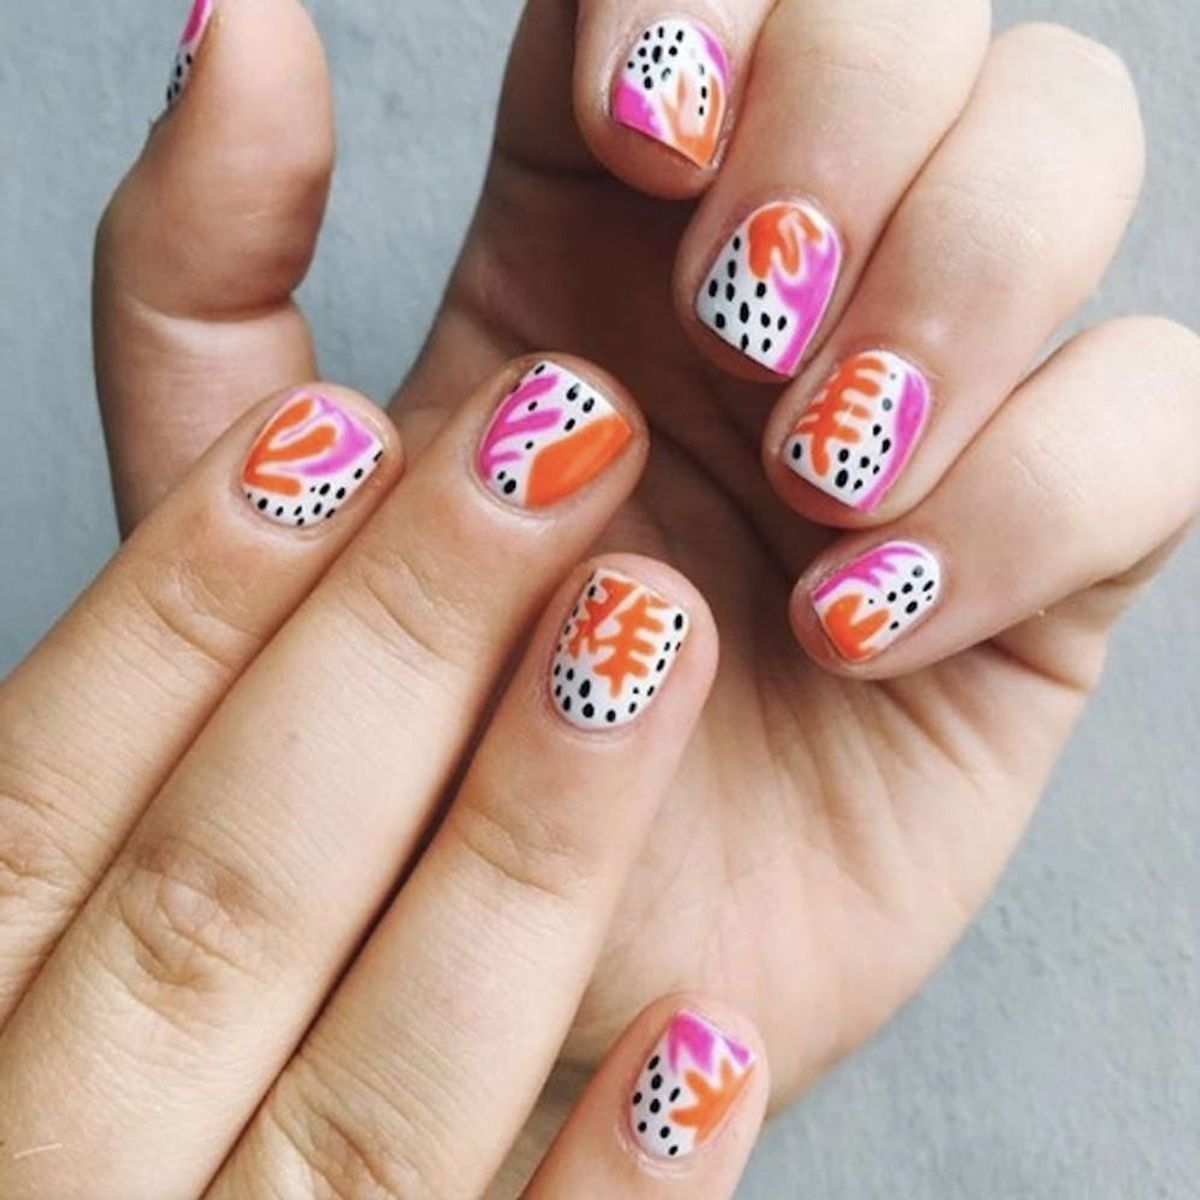 Unleash Your Inner Artist With These Matisse-Inspired Manicures